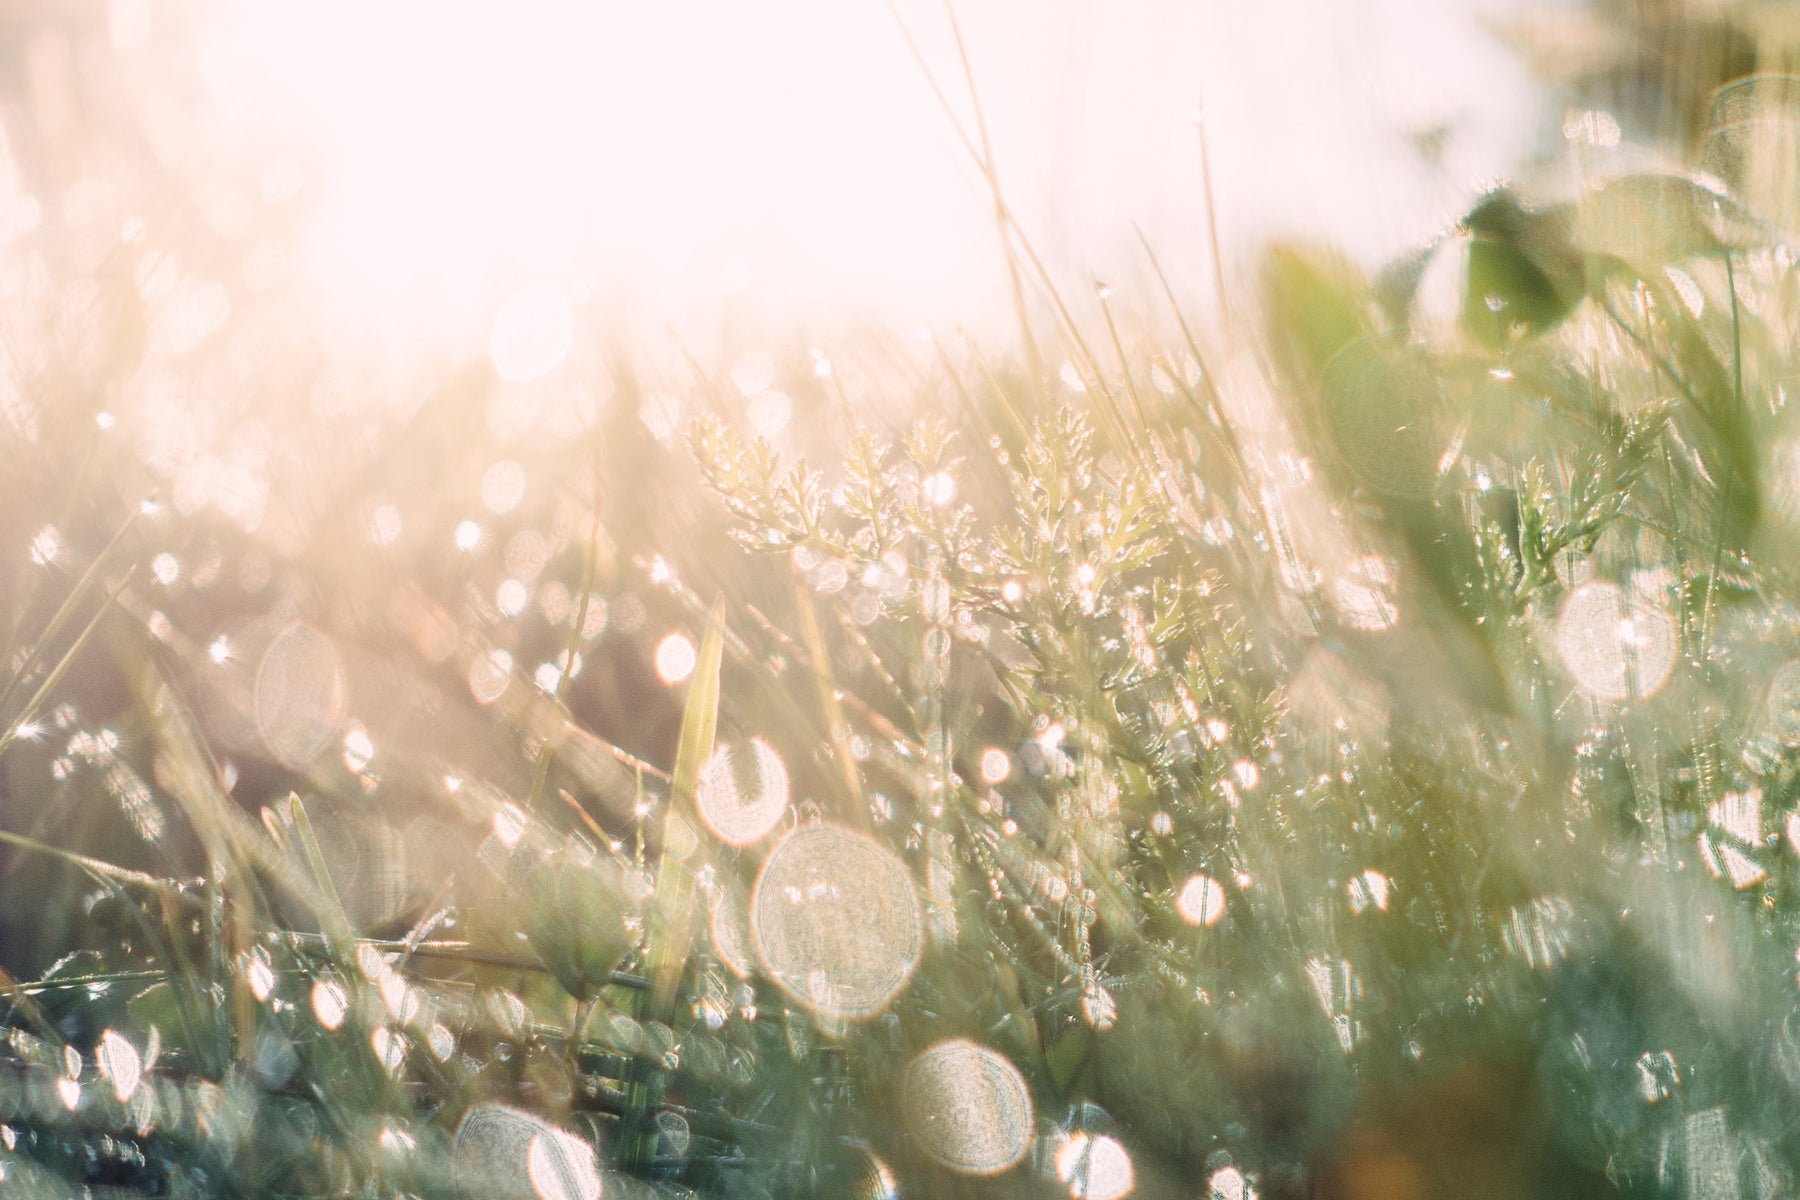 Green grass with dew drops in sunlight